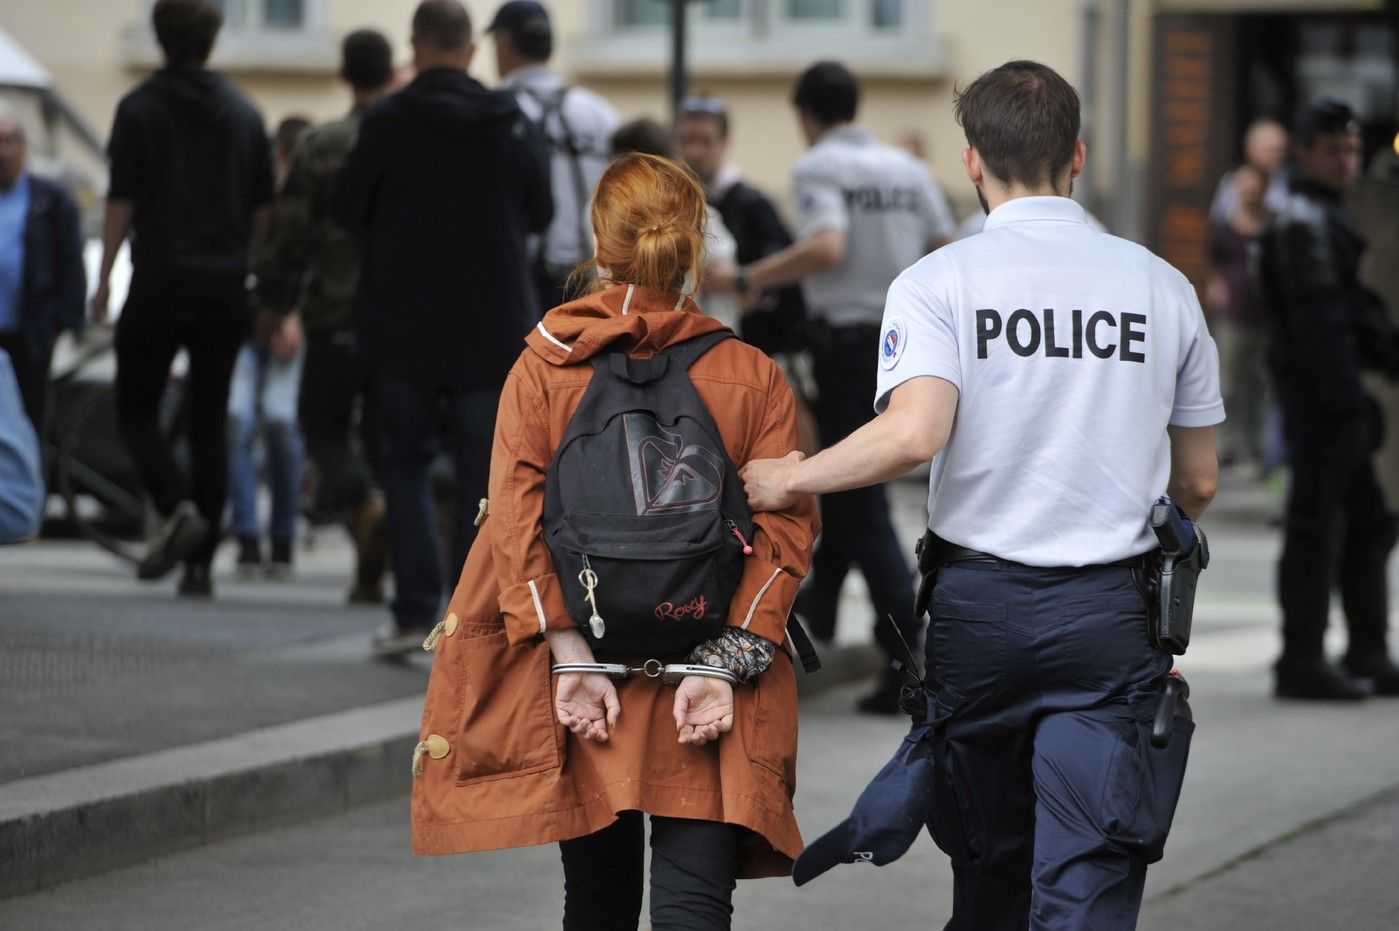 Woman arrested and handcuffed behind back in france. 